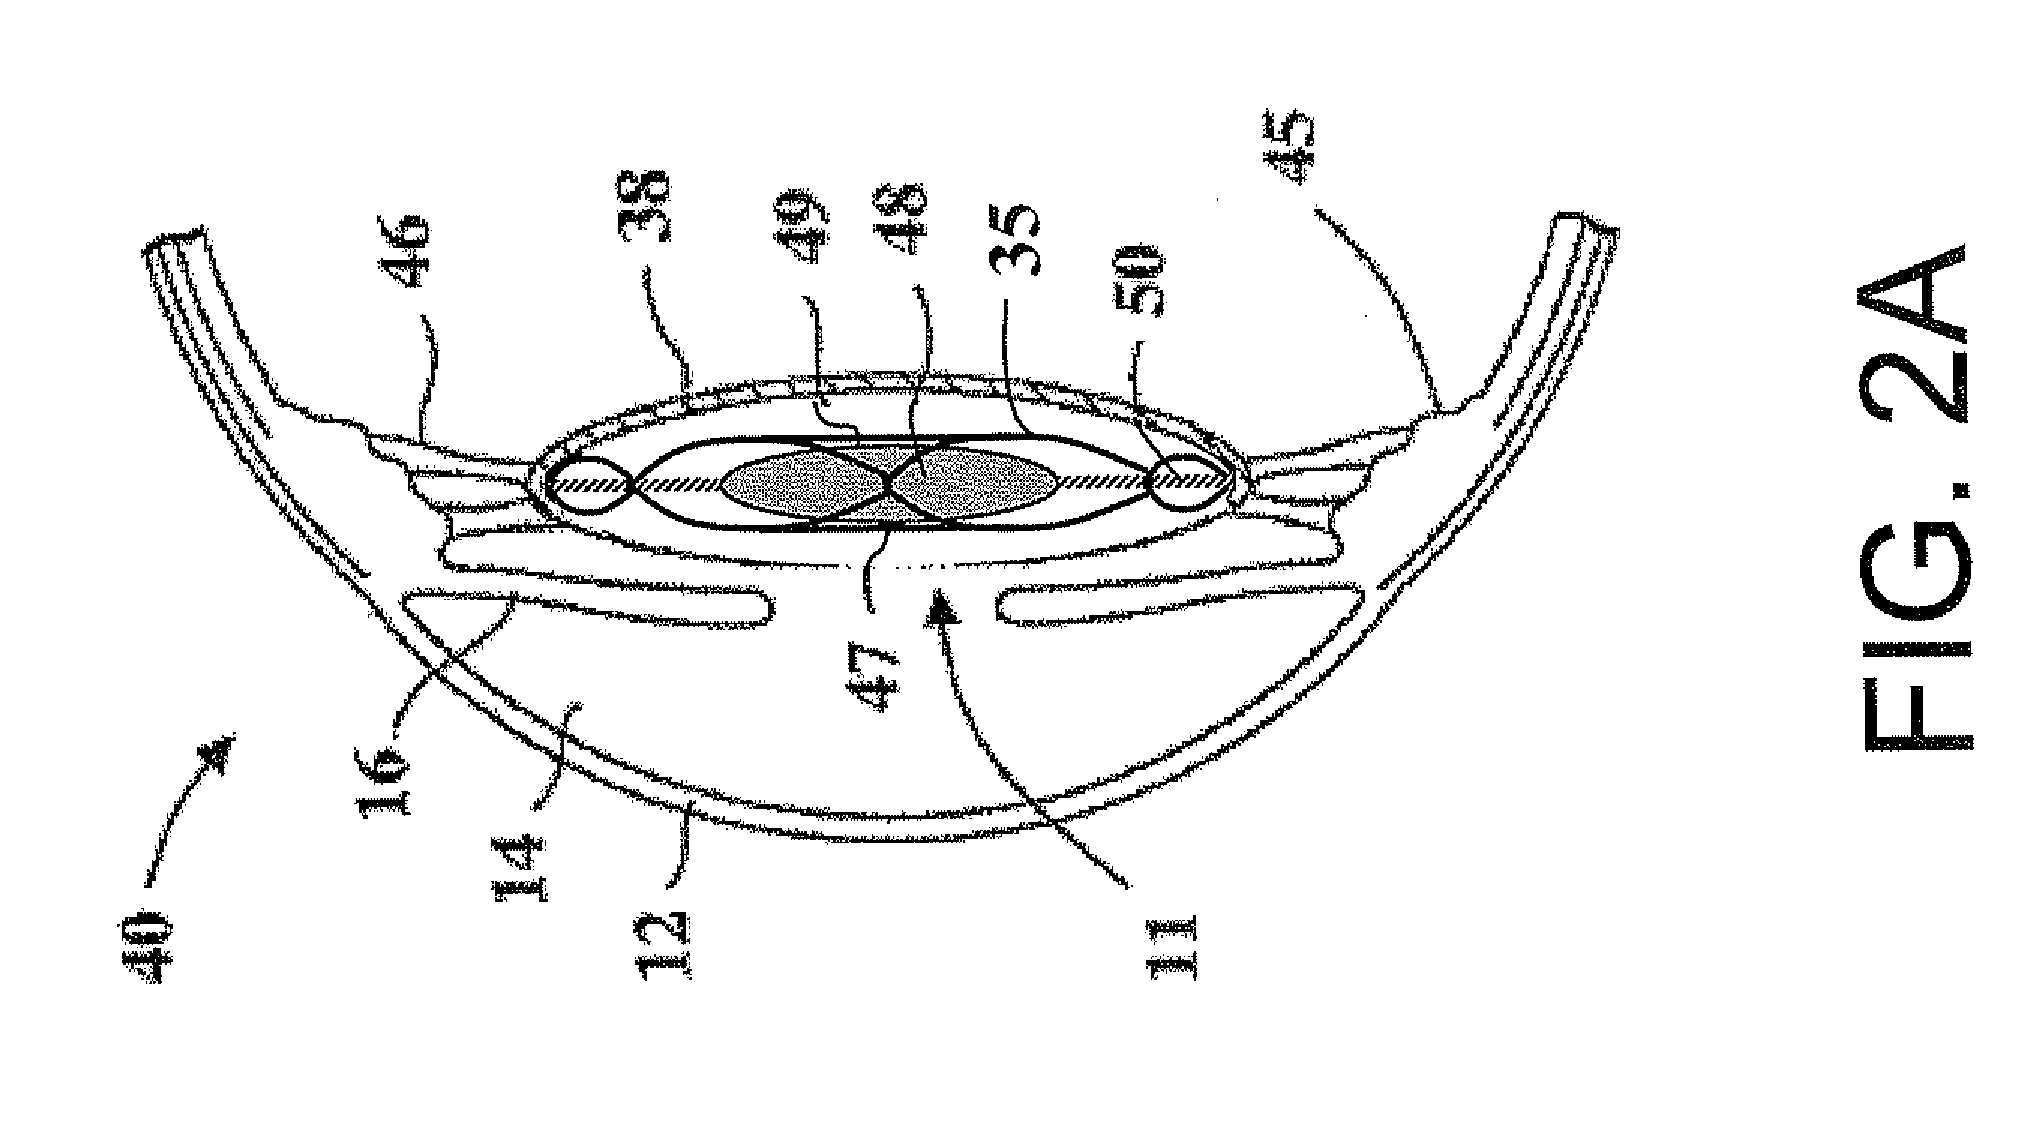 Intraocular lens and capsular ring